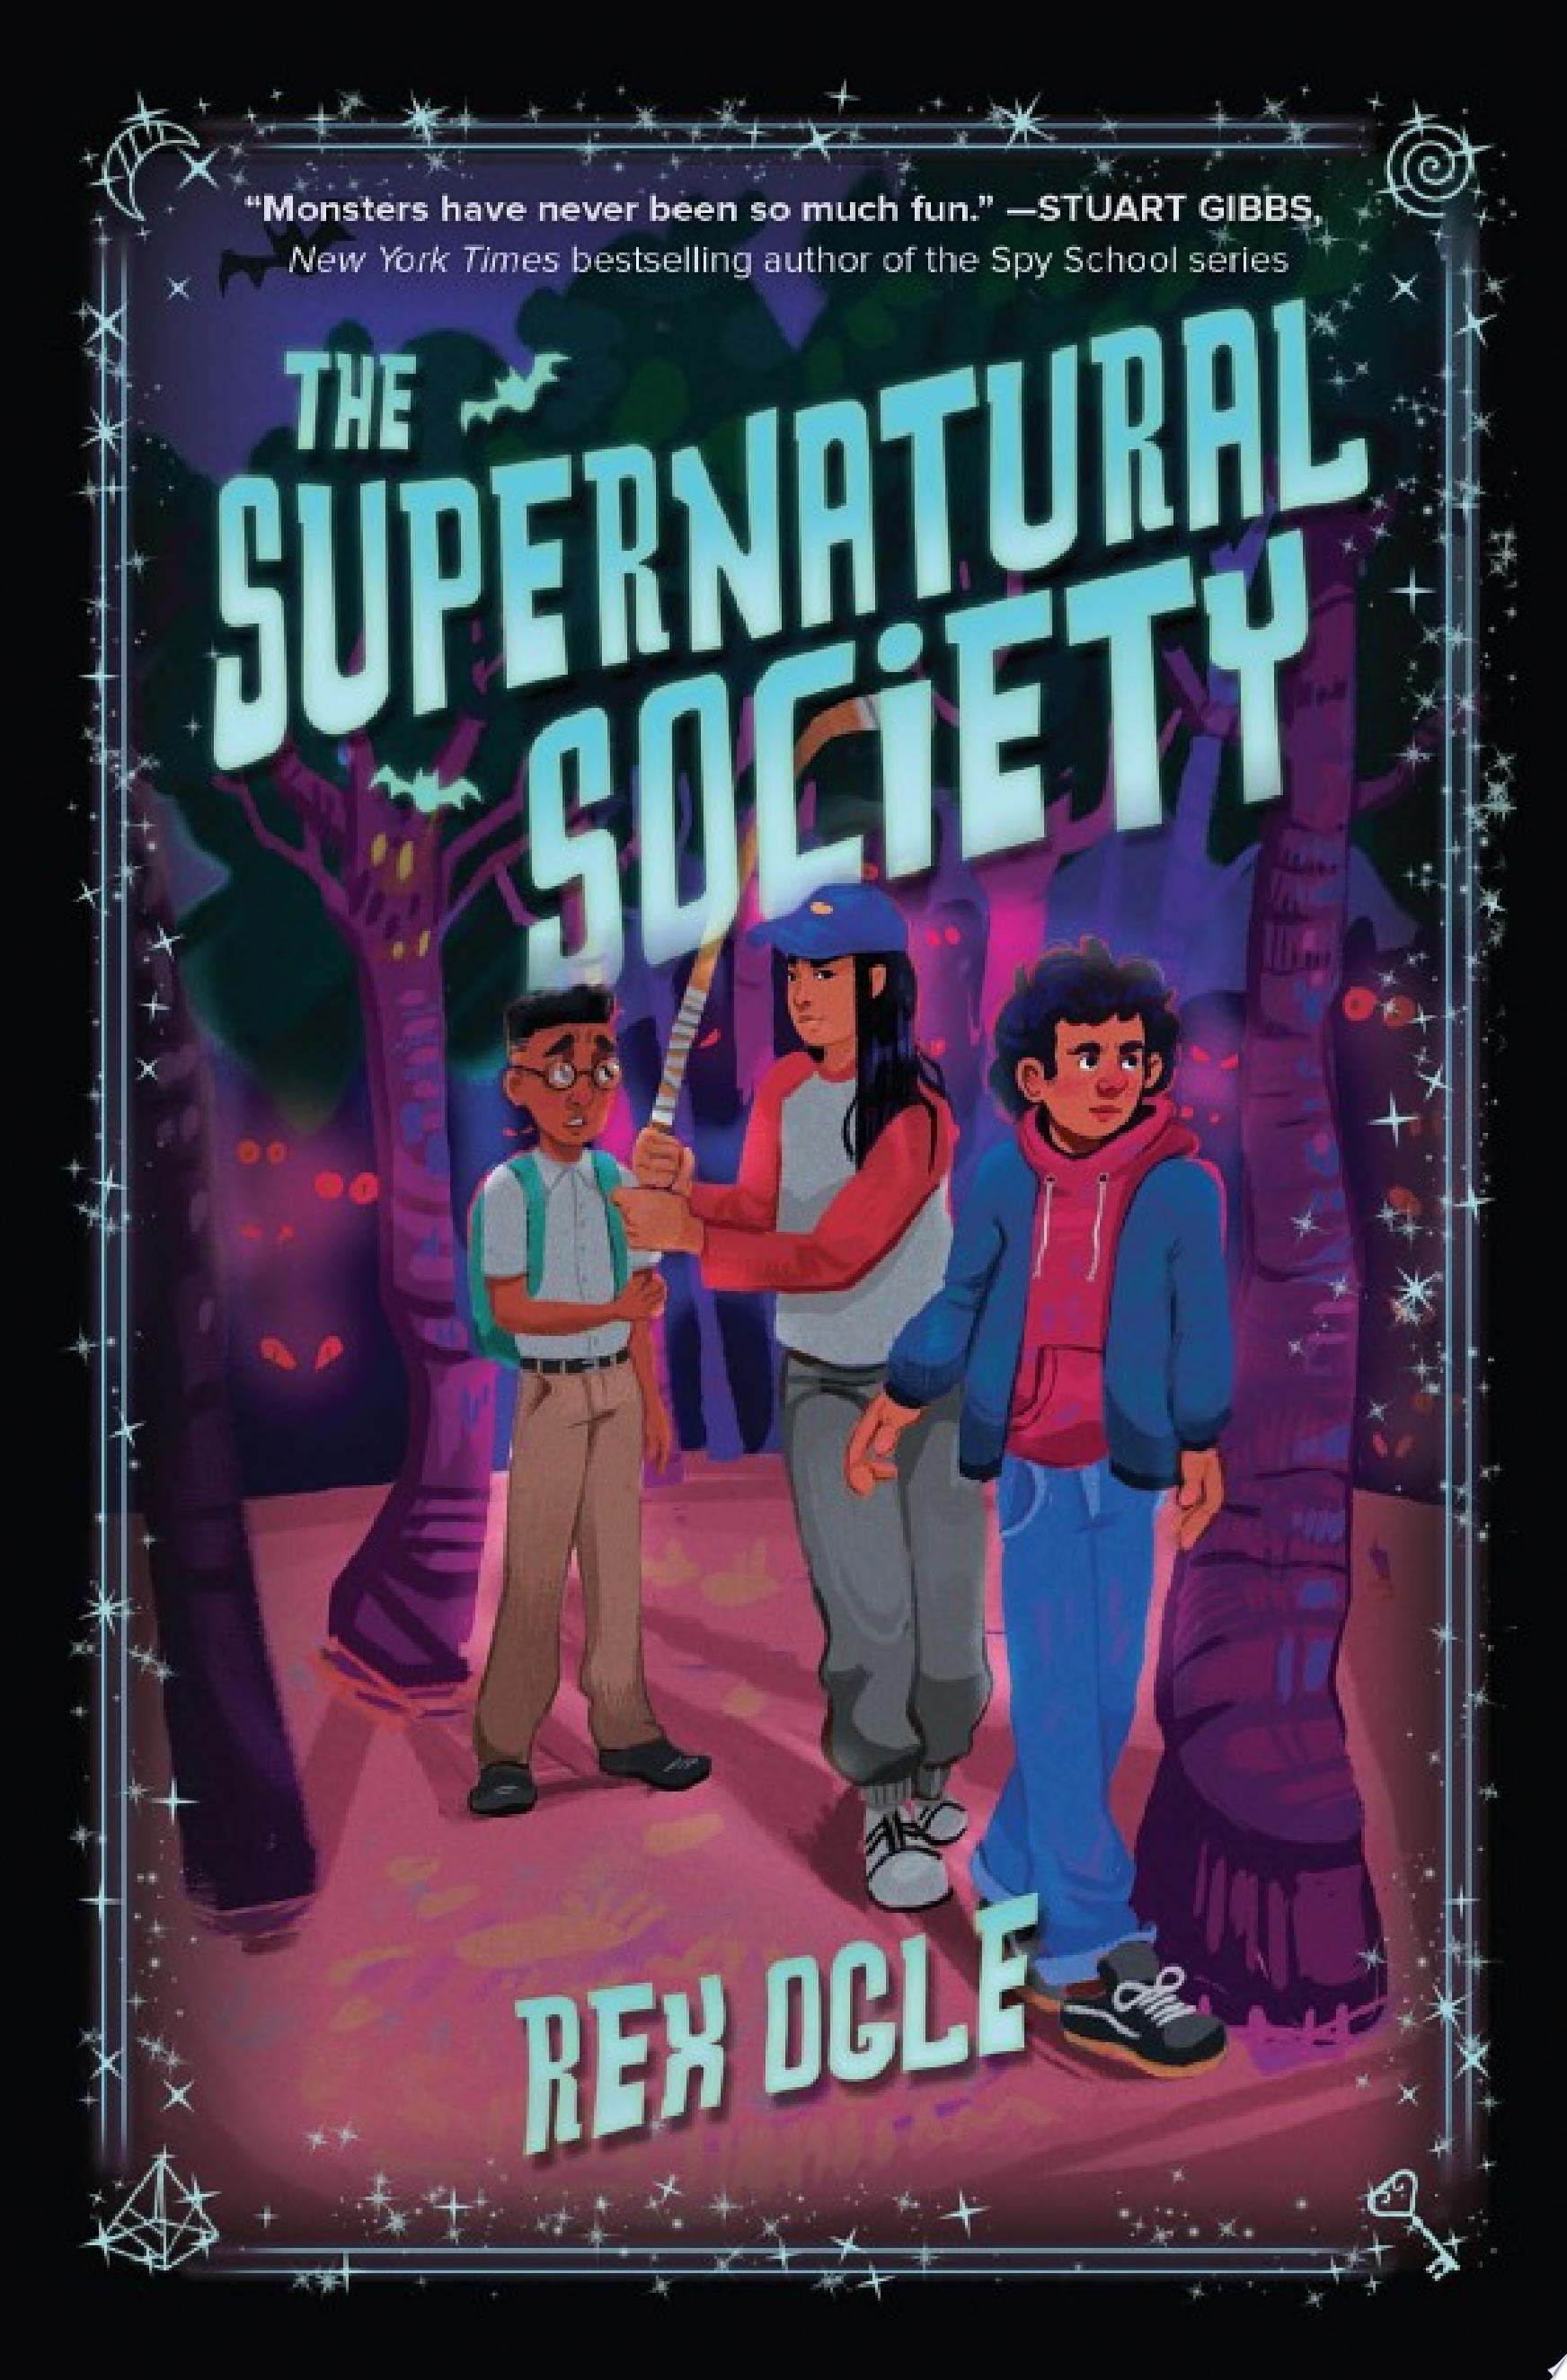 Image for "The Supernatural Society"